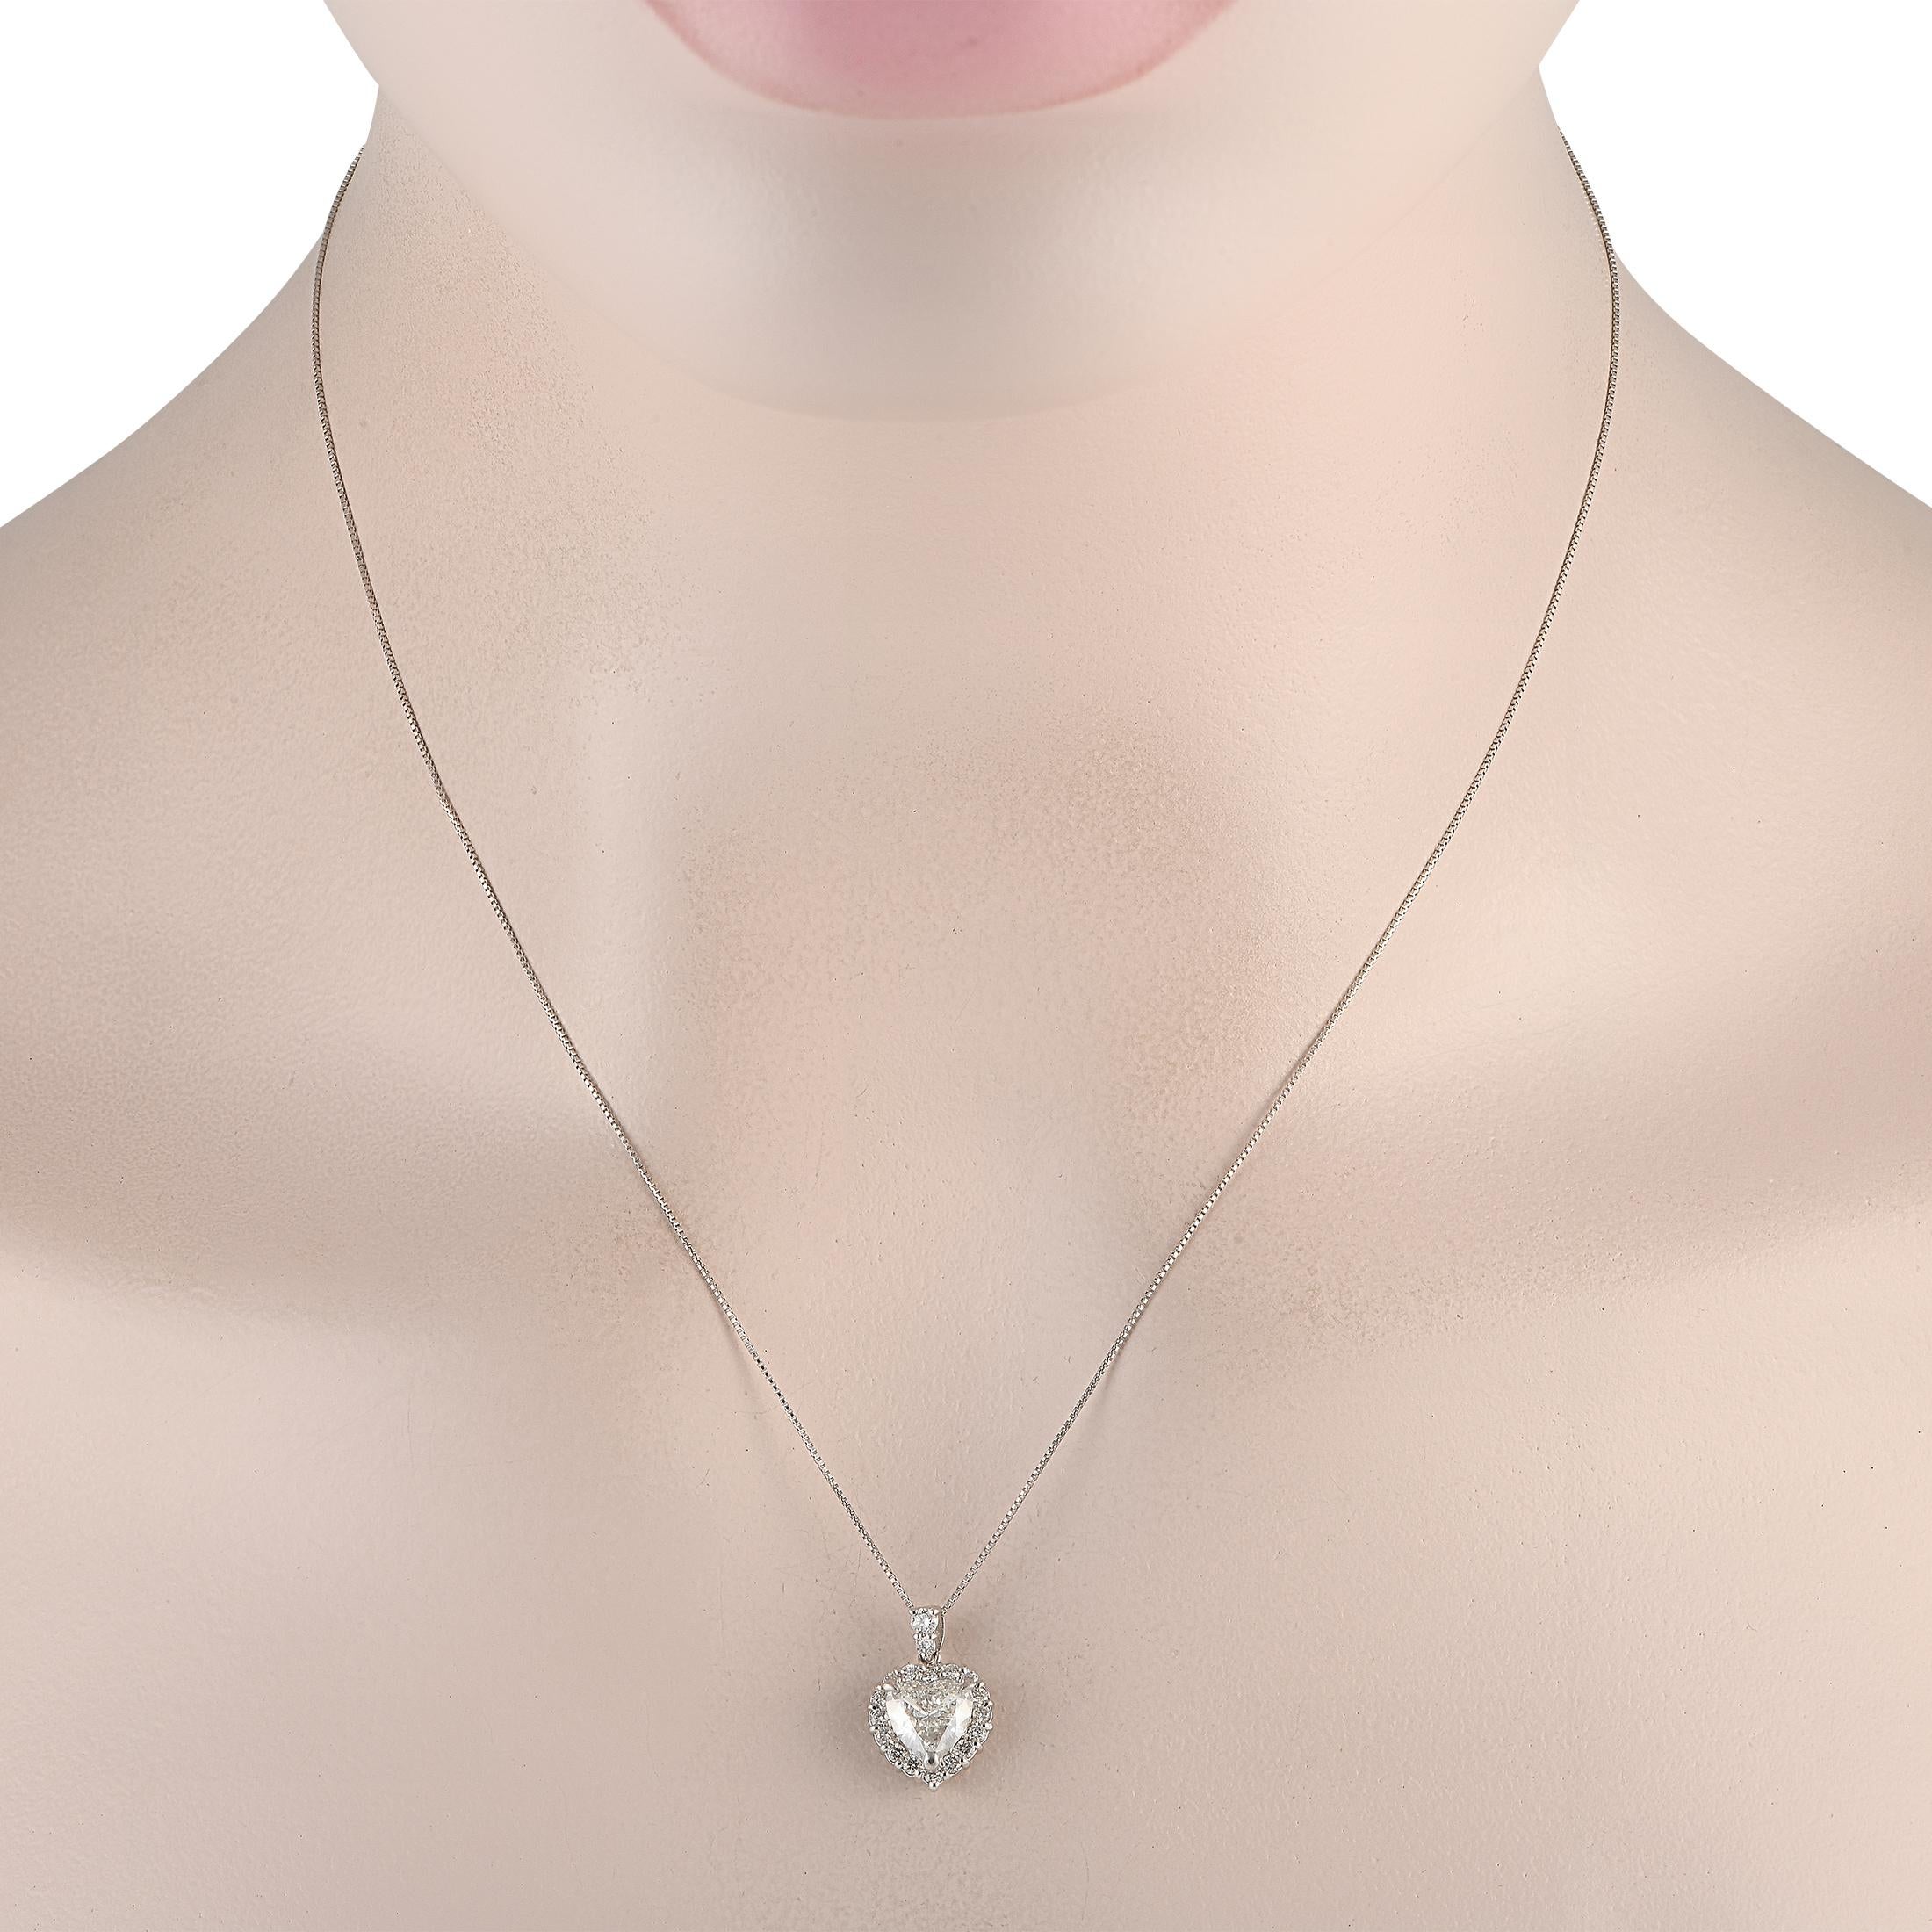 This breathtaking necklace is simply unforgettable. The perfect gift for your beloved, this impeccably crafted accessory comes complete with an opulent 18K White Gold pendant measuring 0.65 long by 0.45 wide suspended from a sleek 18 box chain. A